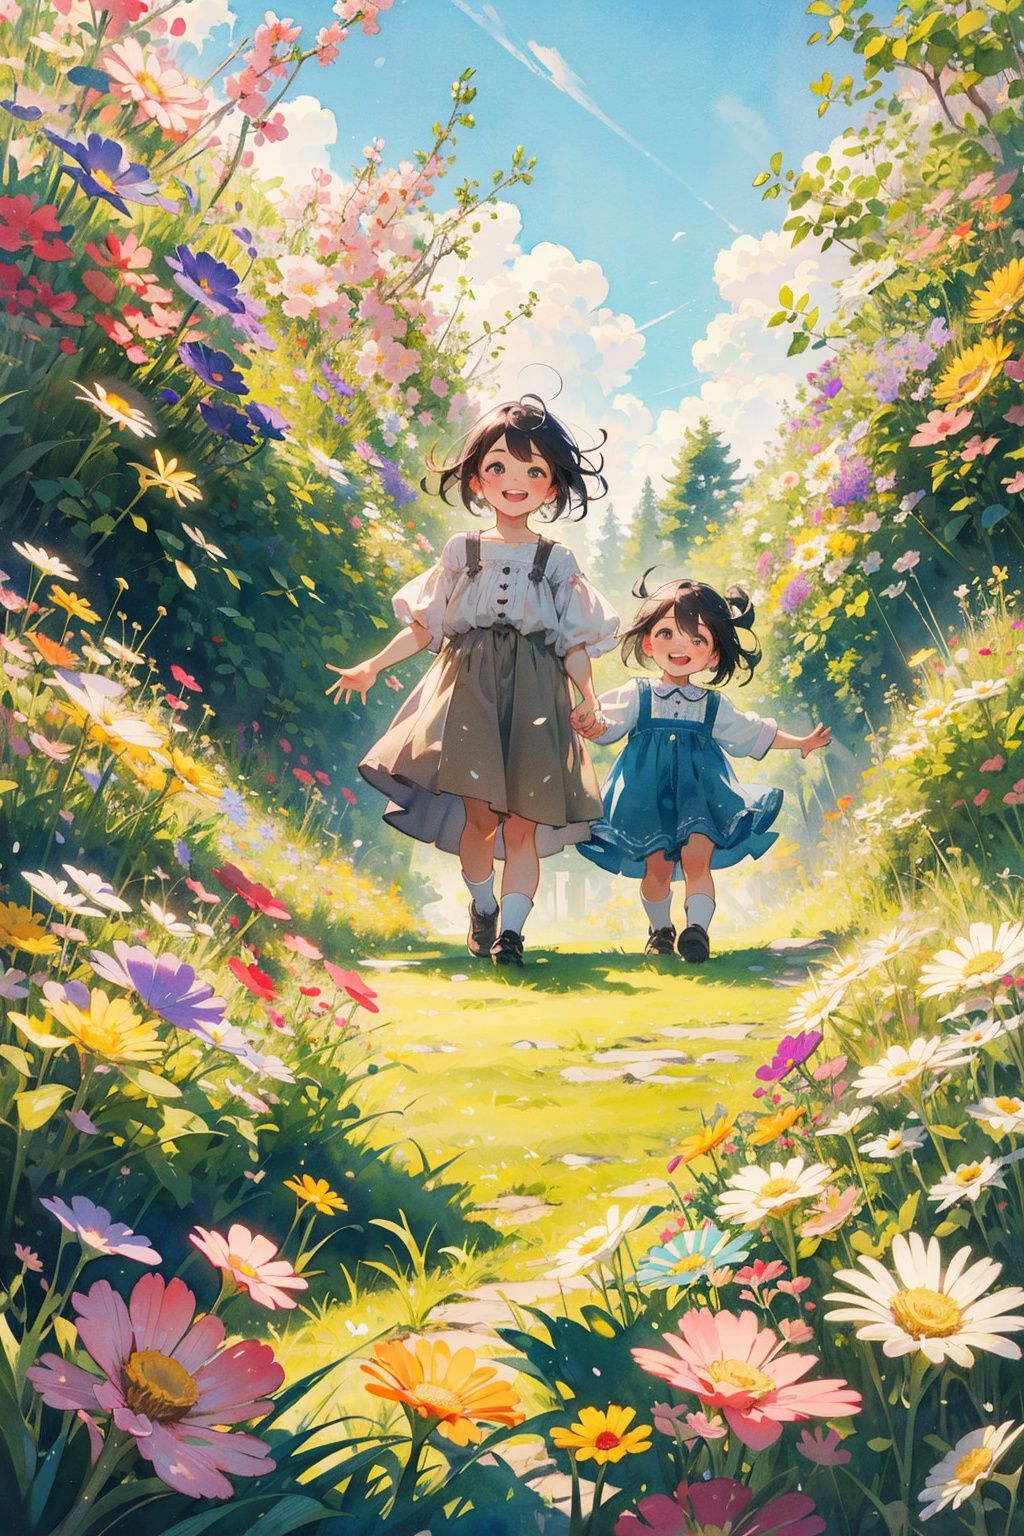  Best quality,8k,cg,
absurdres,incredibly absurdres,masterpiece,best quality,1girl,1boy,child,detail light,small animals,in spring,nature,action,kawaii,in a meadow,full-blown flowers,whole family,love,friend,play,lively,watercolor,happy,smiling,HS,